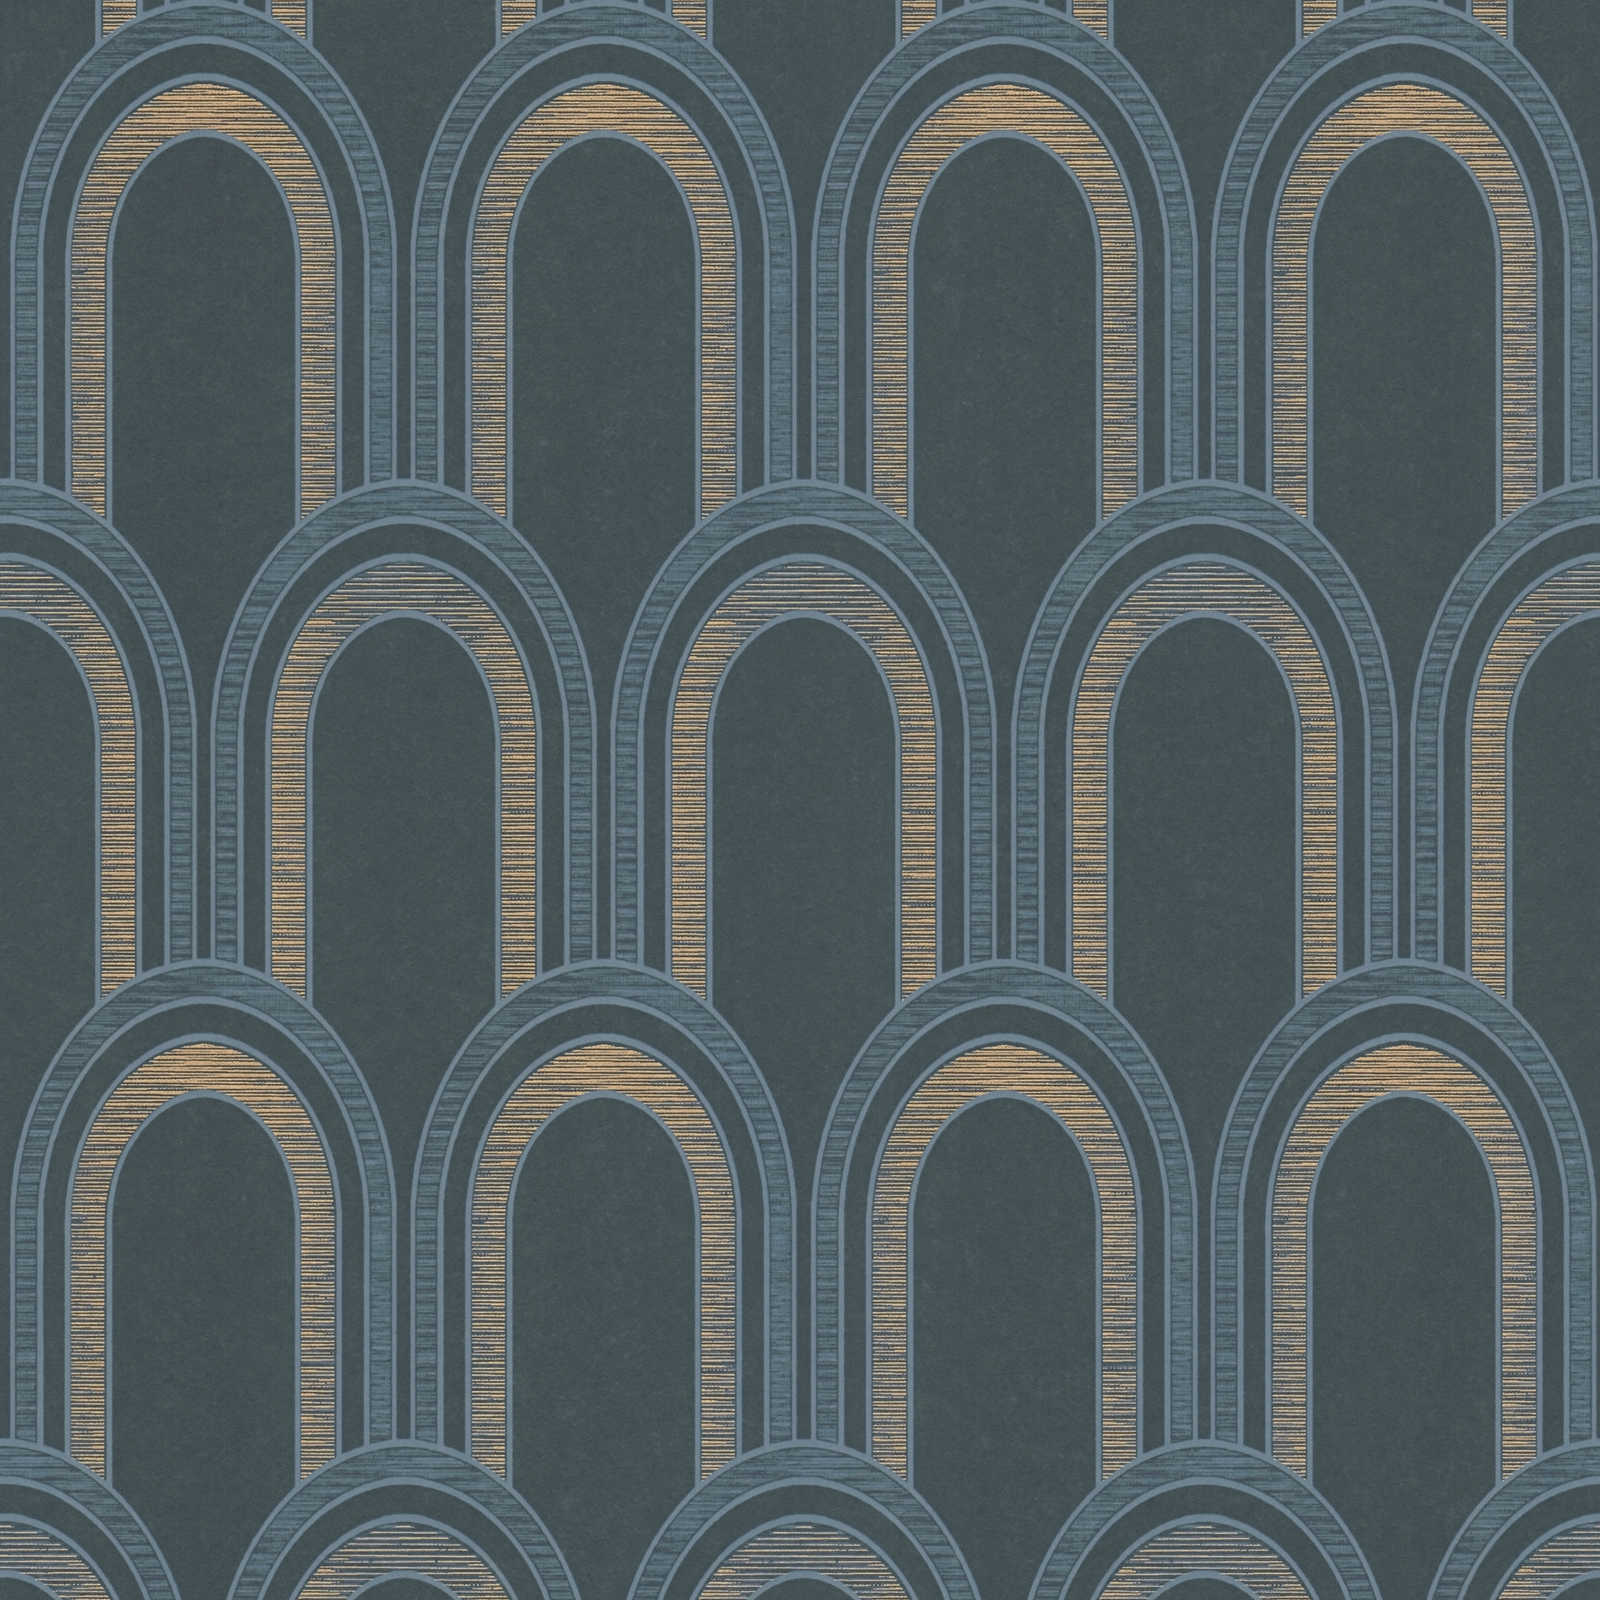         Wallpaper with bow pattern and glossy effect - petrol, blue, gold
    